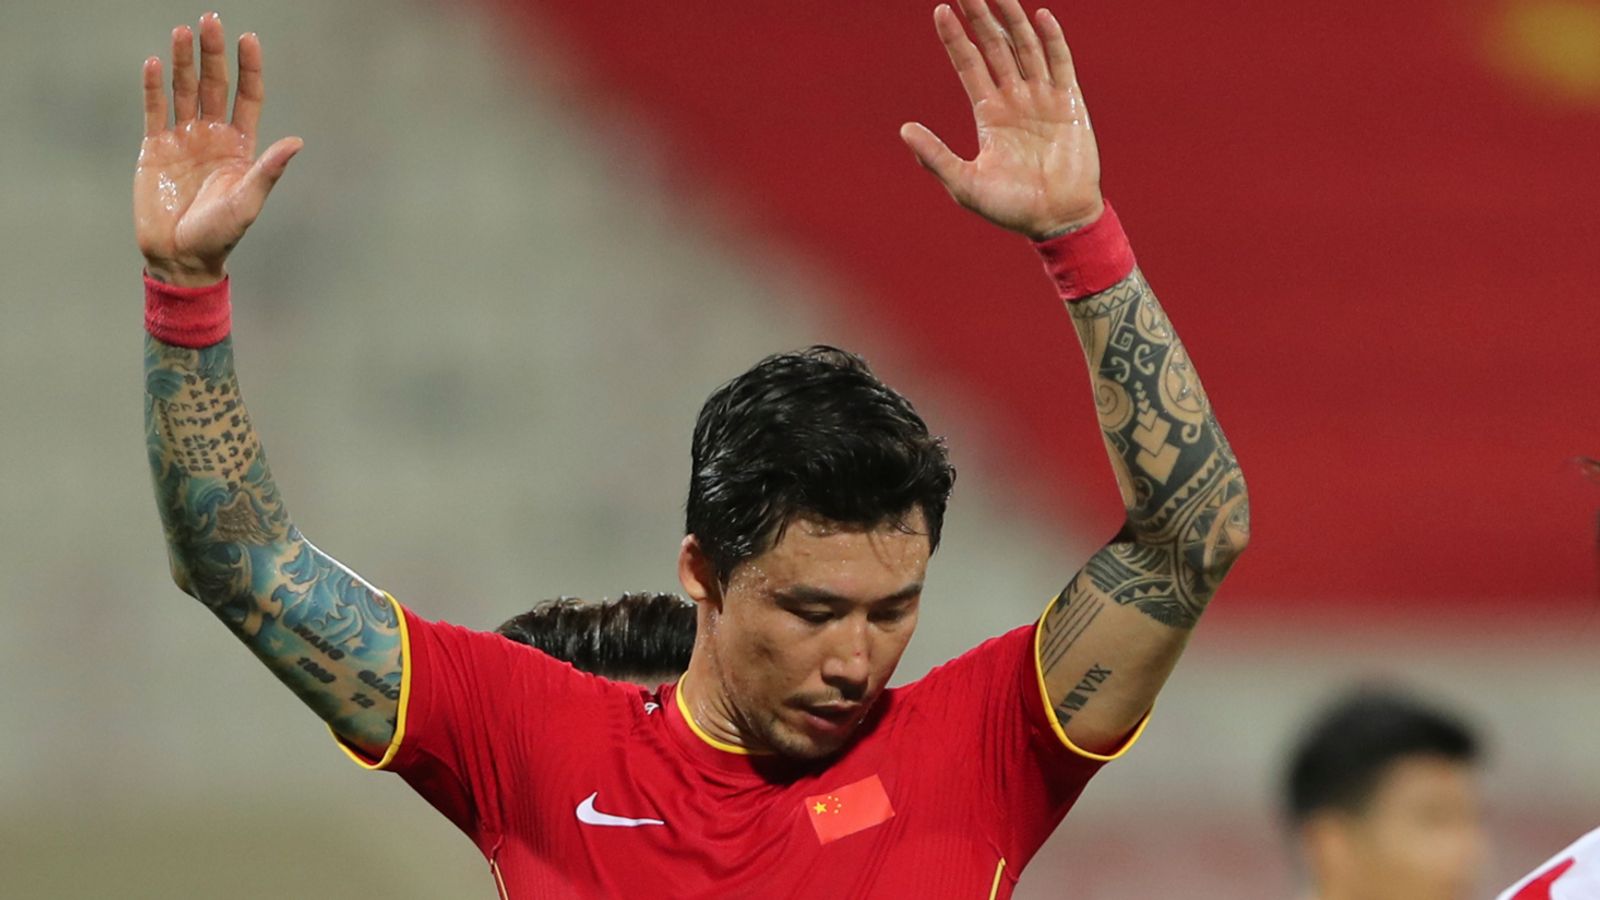 Chinese authorities ban national-team footballers from showing tattoos to set 'g..